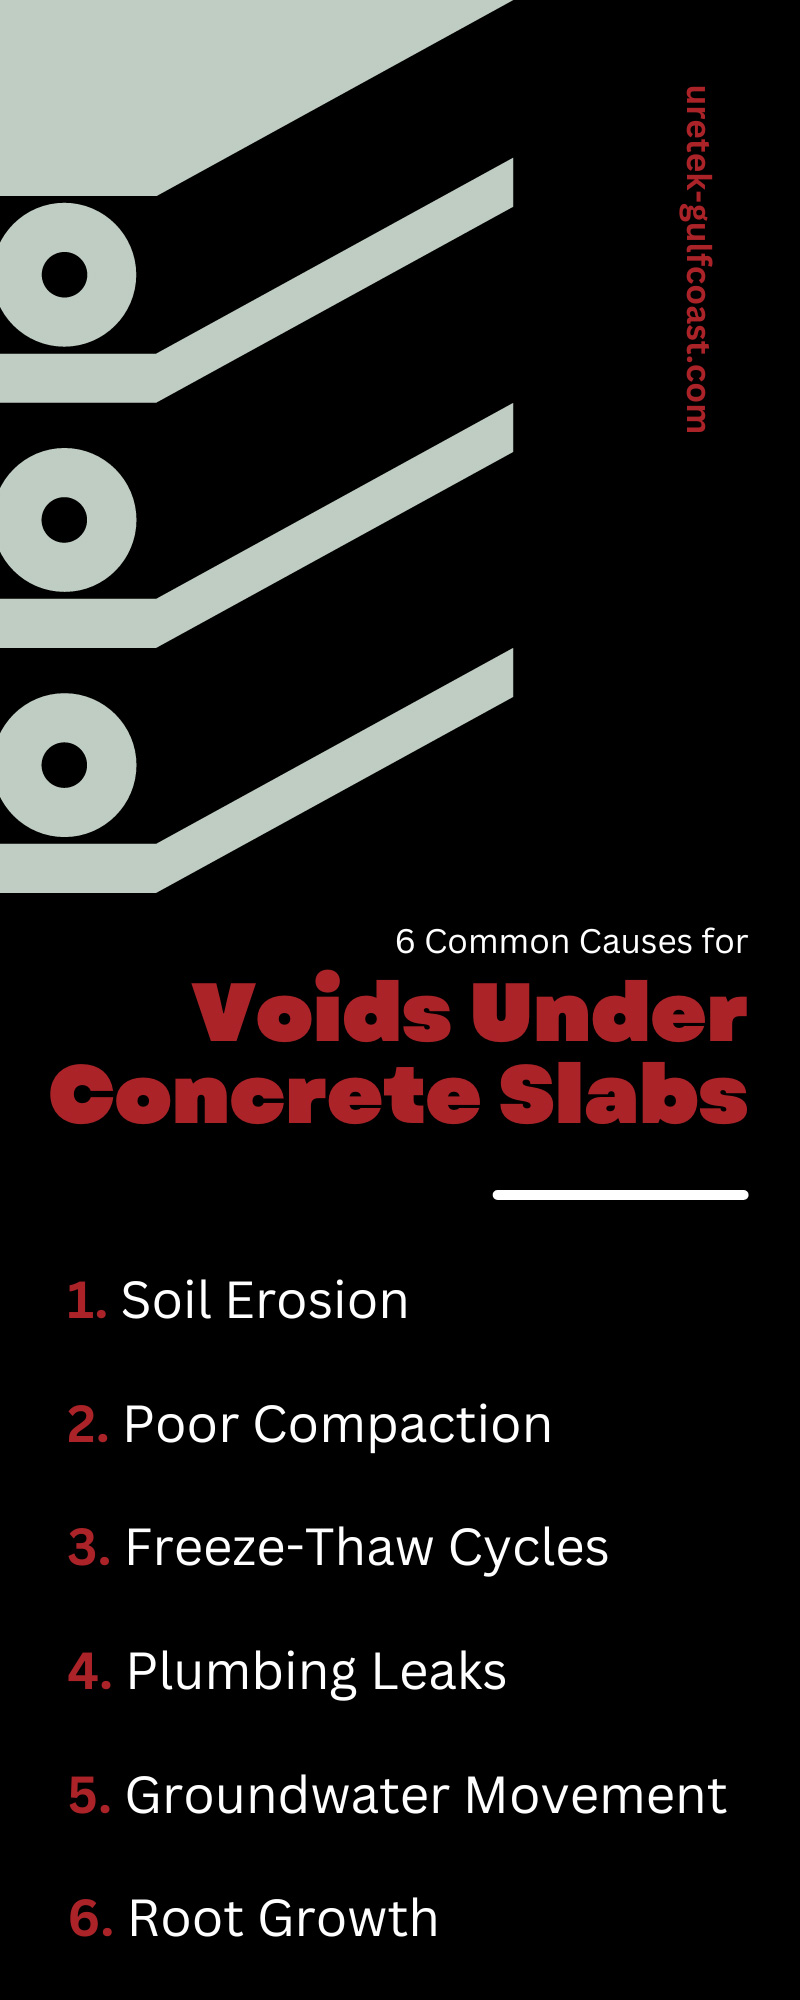 6 Common Causes for Voids Under Concrete Slabs